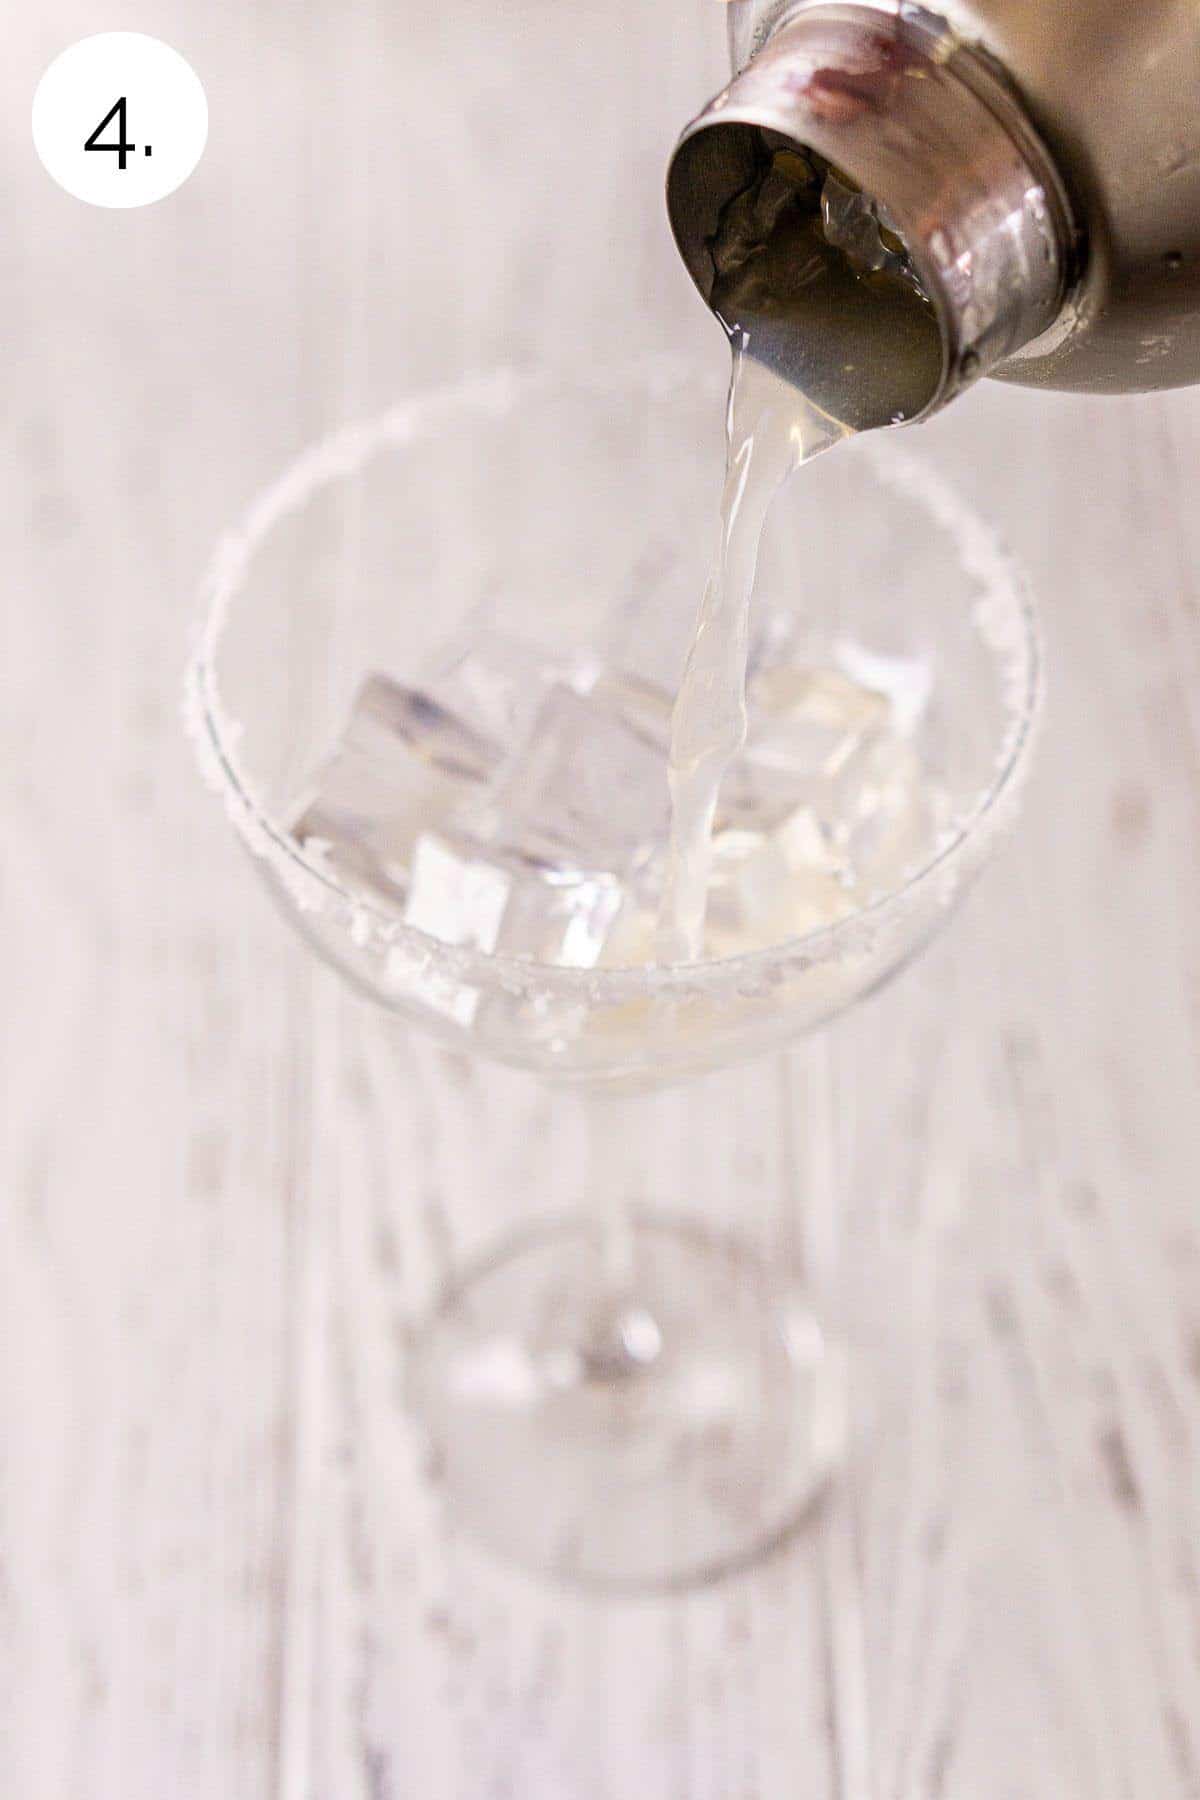 A cocktail shaker straining the margarita into a cocktail glass filled with ice on a white wooden surface.